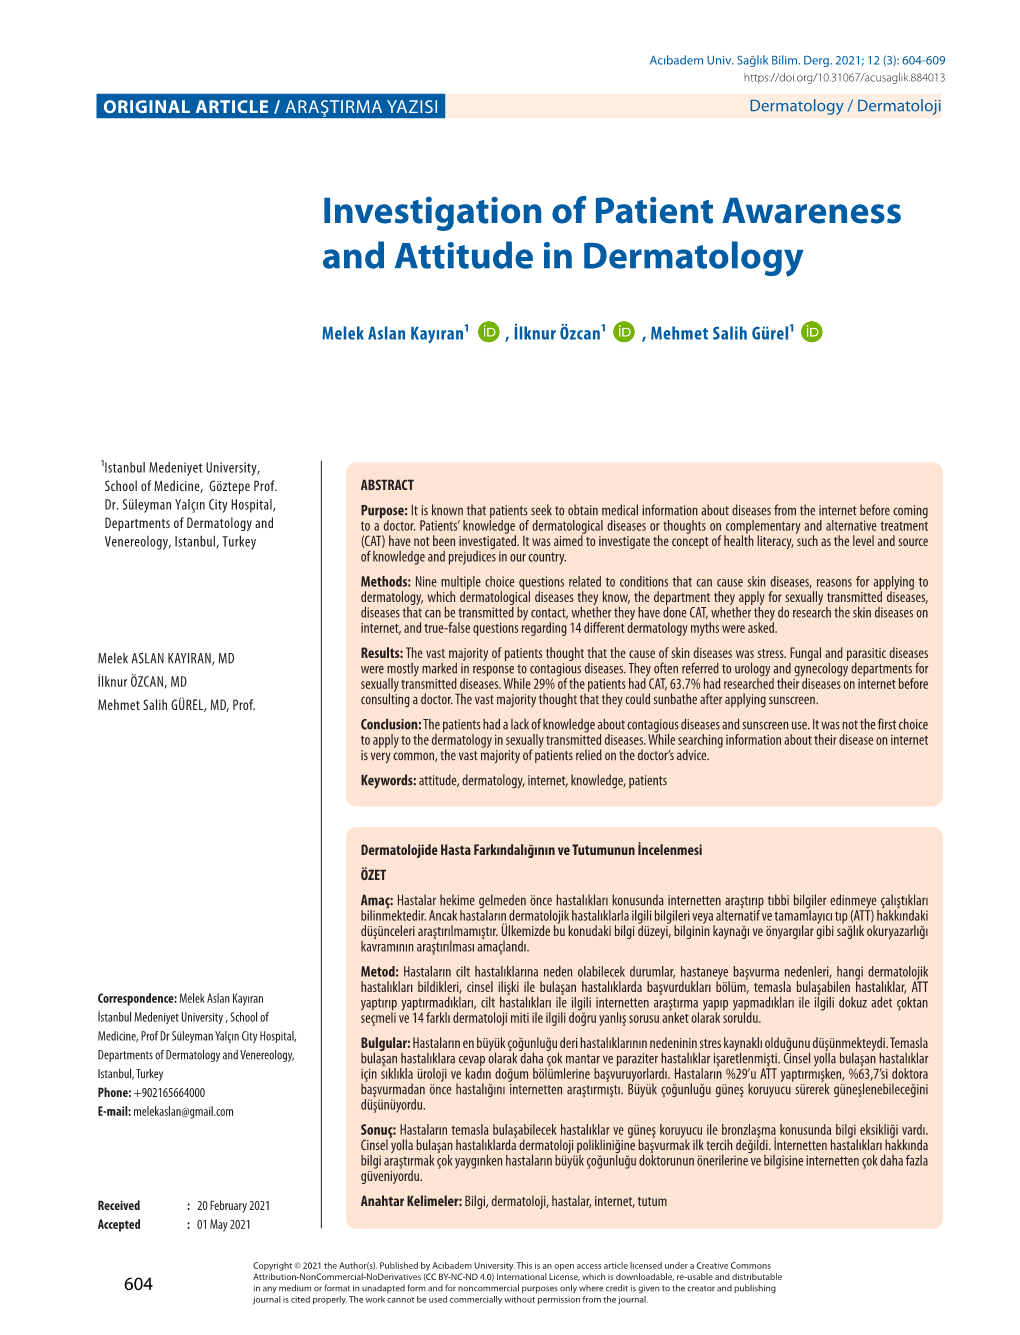 Investigation of Patient Awareness and Attitude in Dermatology